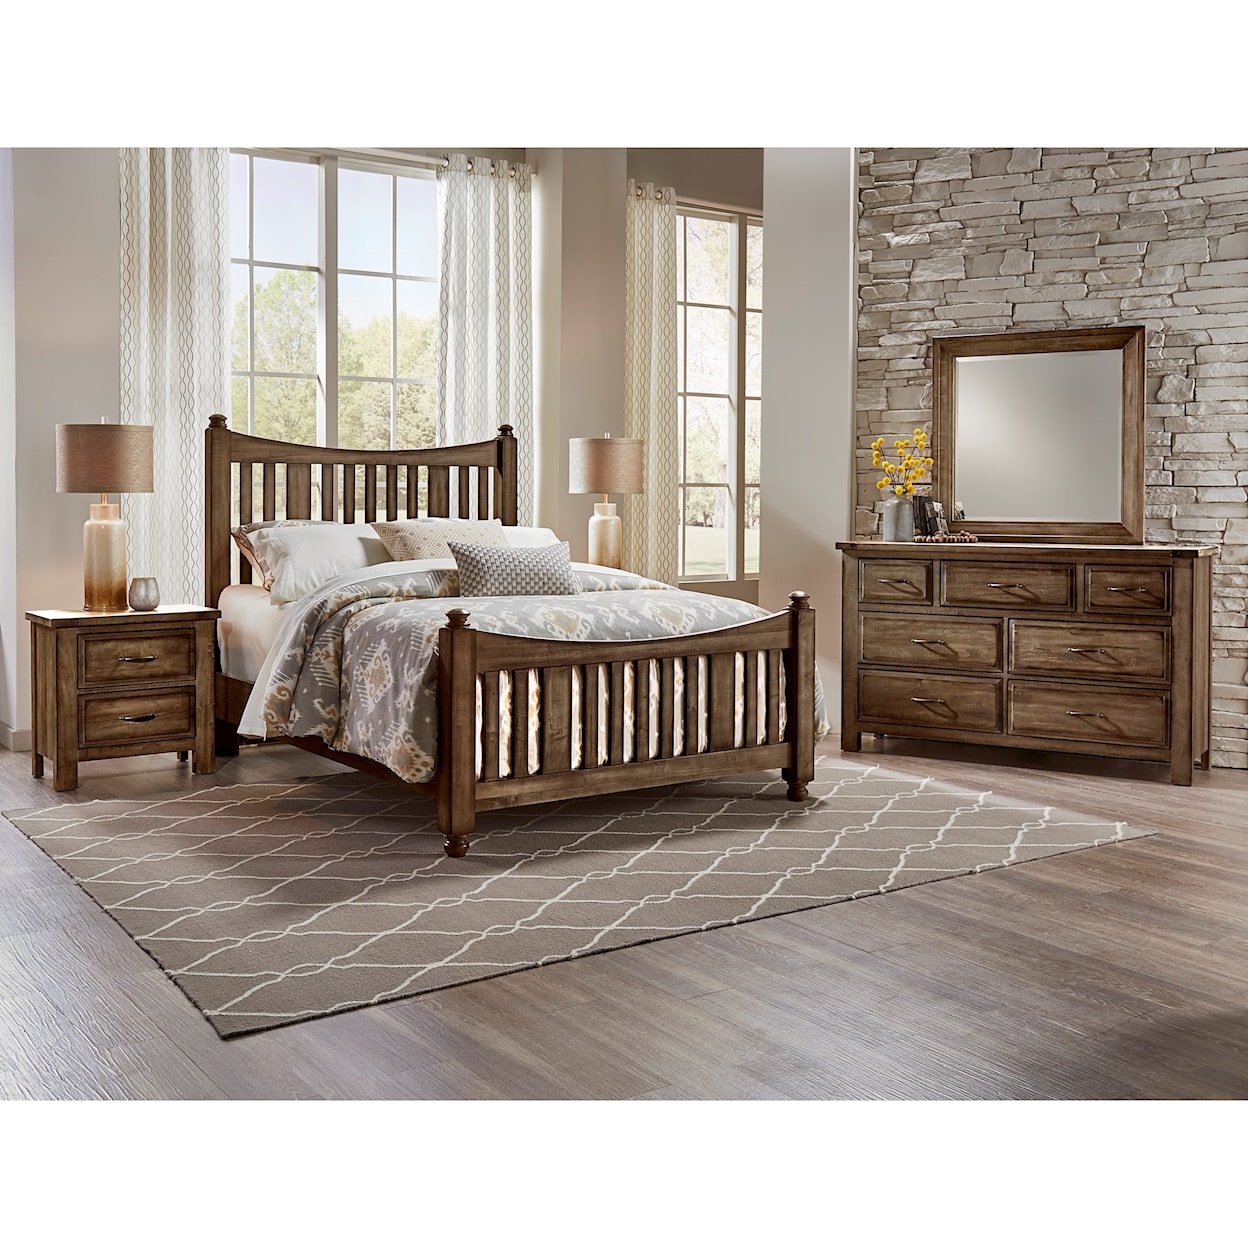 Virginia House Mt Airy King Slat Poster Bed